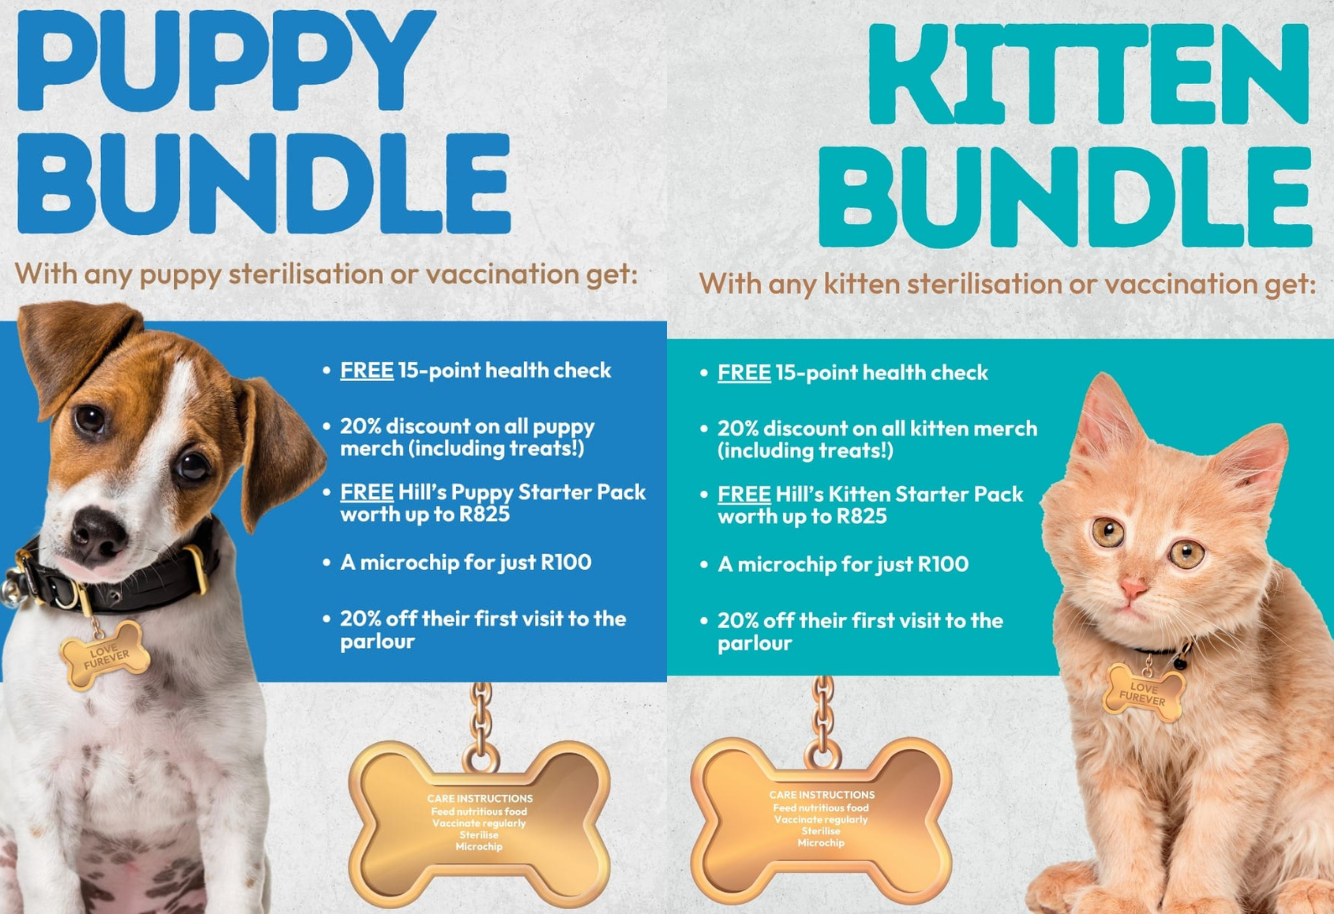 01 FEBRUARY - 31 MARCH 2024 - ARE YOU READY TO WELCOME A NEW FURRY FRIEND INTO YOUR FAMILY? WE HAVE THE PERFECT SOLUTION FOR YOU – OUR PUPPY & KITTEN BUNDLES! WHAT'S INCLUDED IN THE BUNDLES? A 15 POINT WELLNESS CHECK-UP; 20% OFF MERCHANDISE; A HILL’S STARTER PACK AND A MICROCHIP FOR ONLY R100. CONTACT GROENKLOOF DIEREKLINIEK NOW TO SCHEDULE YOUR FREE CHECKUP AND CLAIM YOUR PUPPY AND KITTEN BUNDLES. LIMITED TIME OFFER VALID FROM 1 FEBRUARY – 31 MARCH. CONTACT GROENKLOOF MALMESBURY AT 022 487 1157 OR GROENKLOOF RIEBEEK 082 089 1234 OR WHATSAPP 081 855 0301.